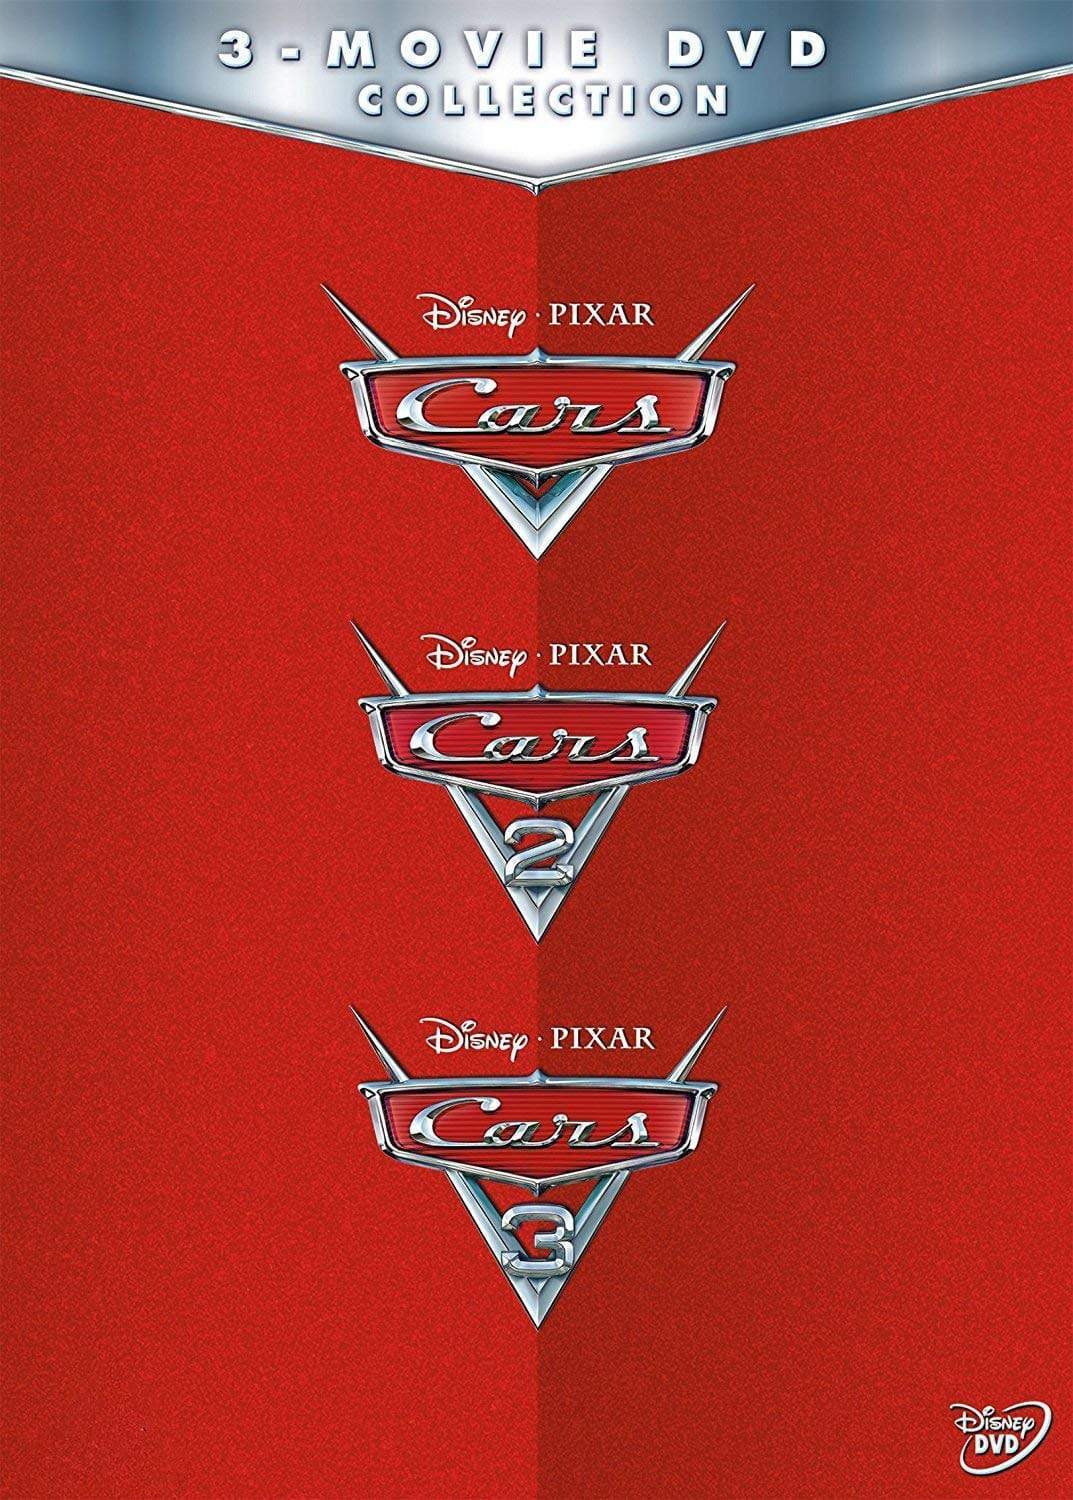 Disney's Cars Trilogy DVD Set Includes All 3 Movies